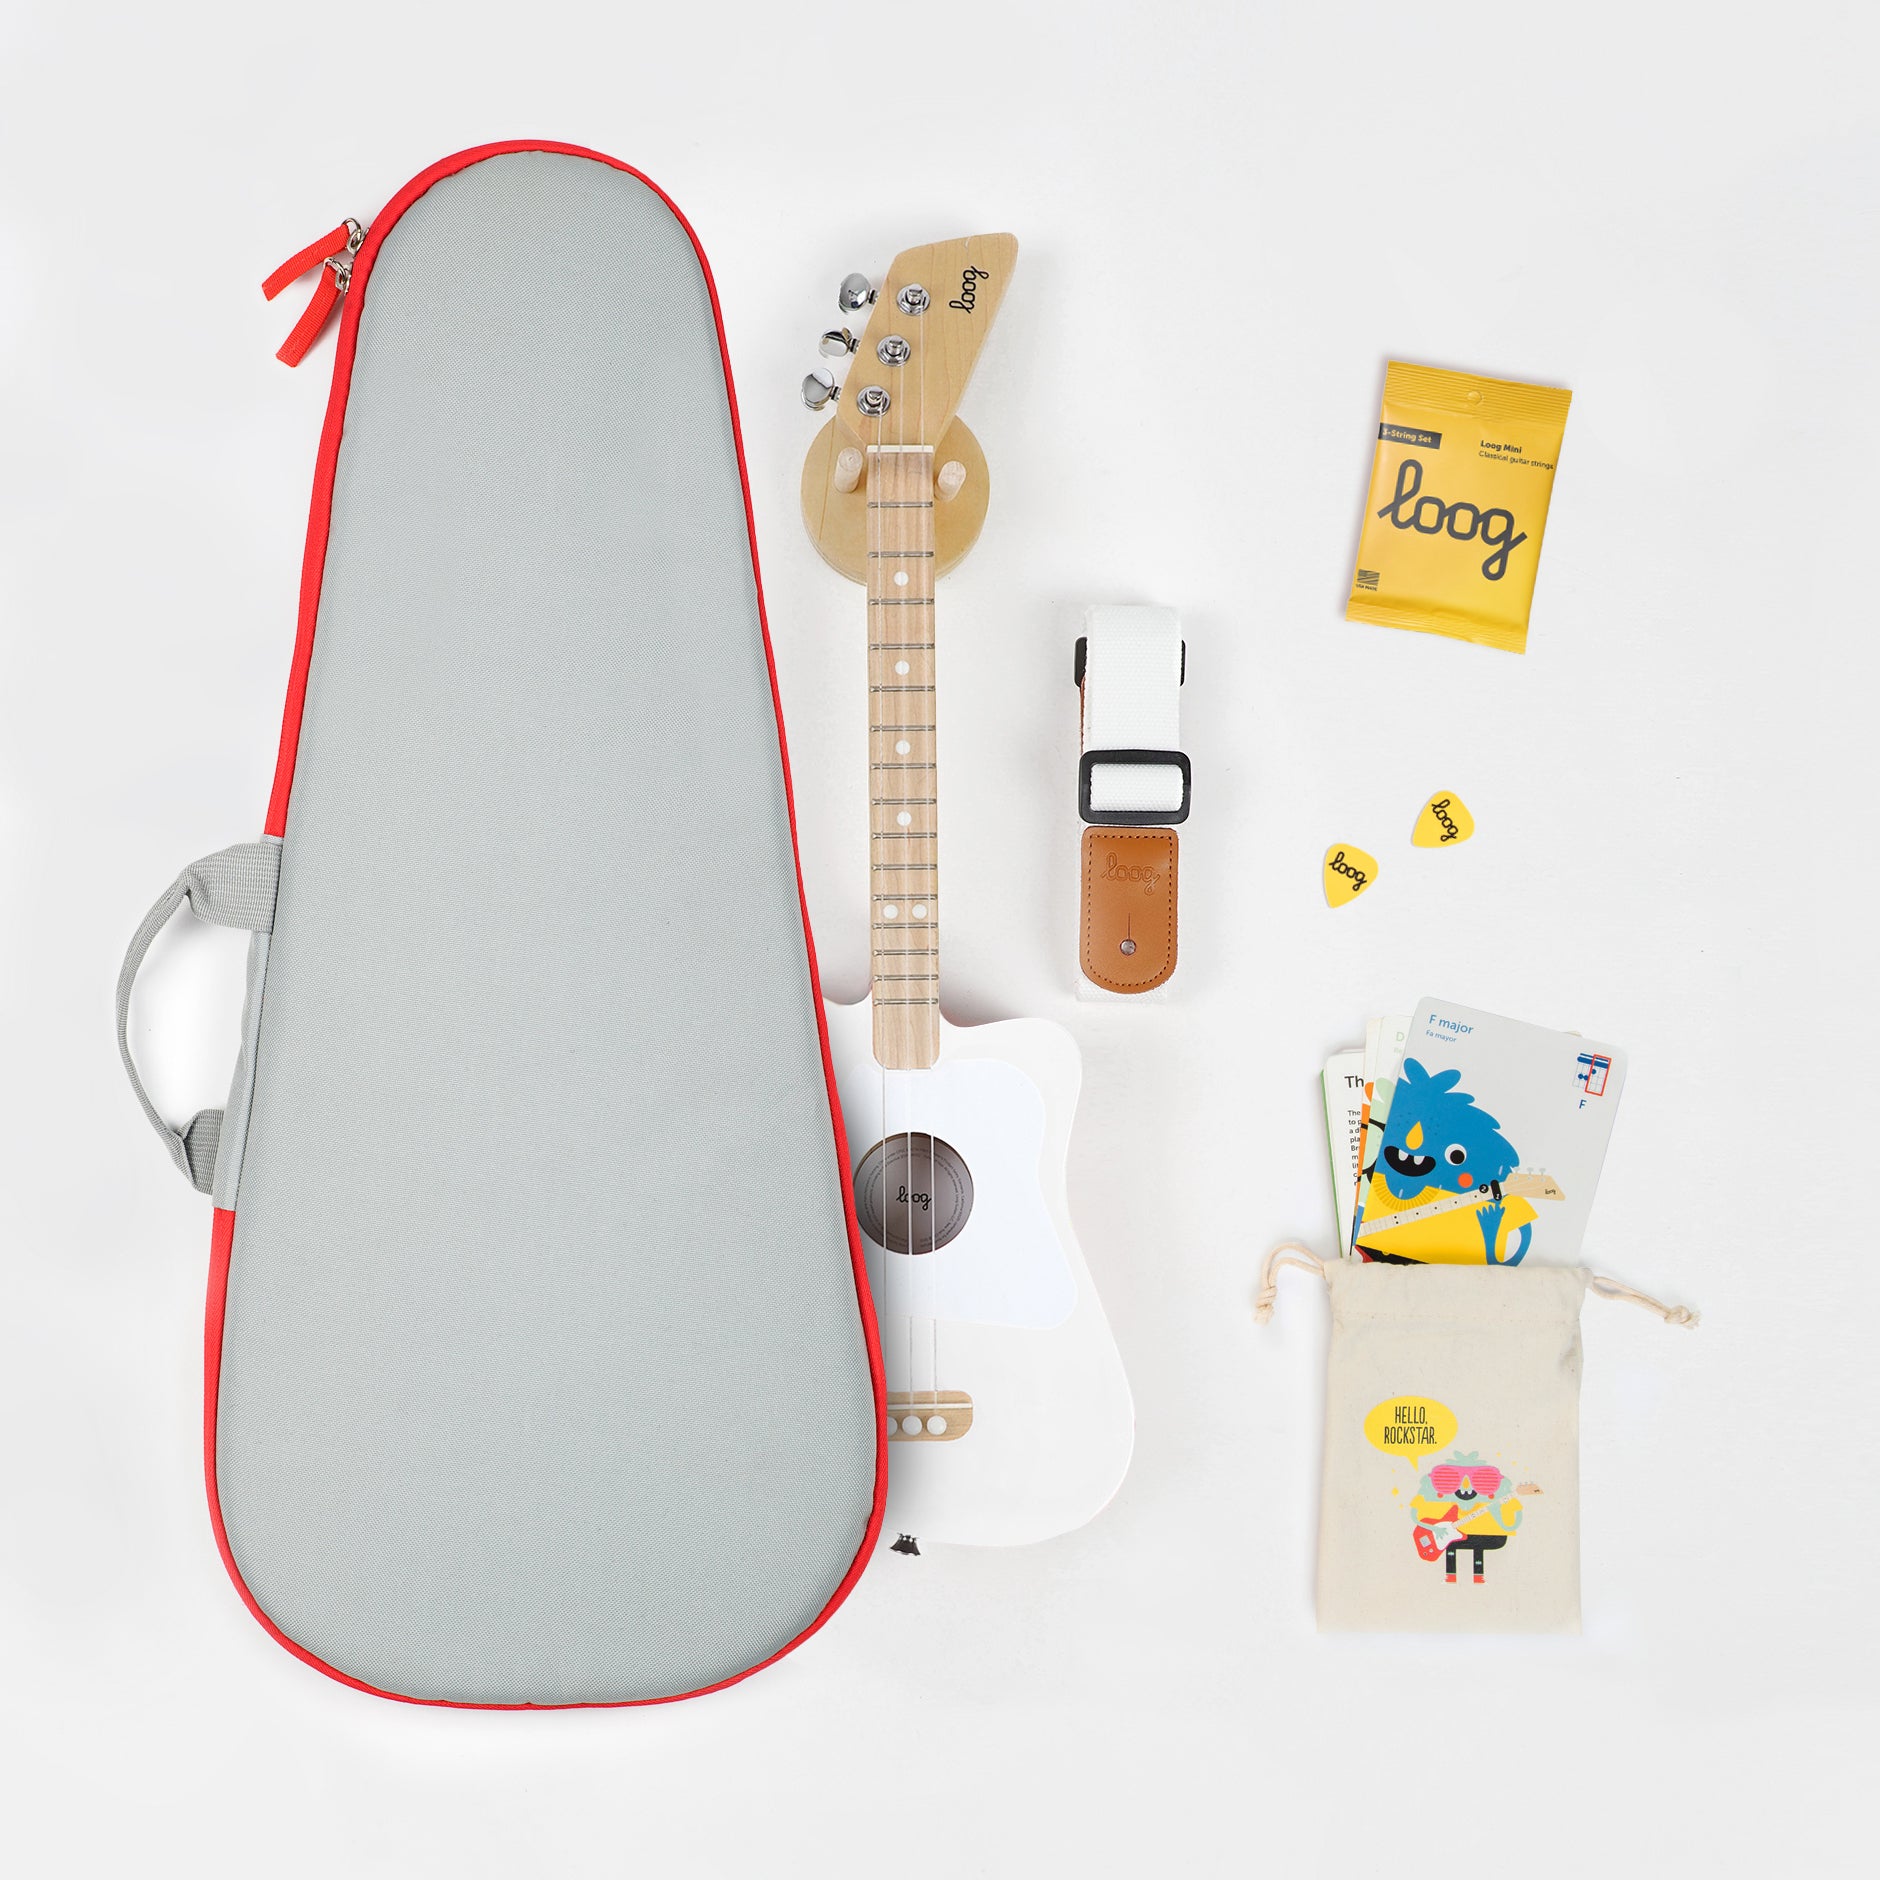 THE NORTH FACE BC Guiter Case 未開封品メンズ